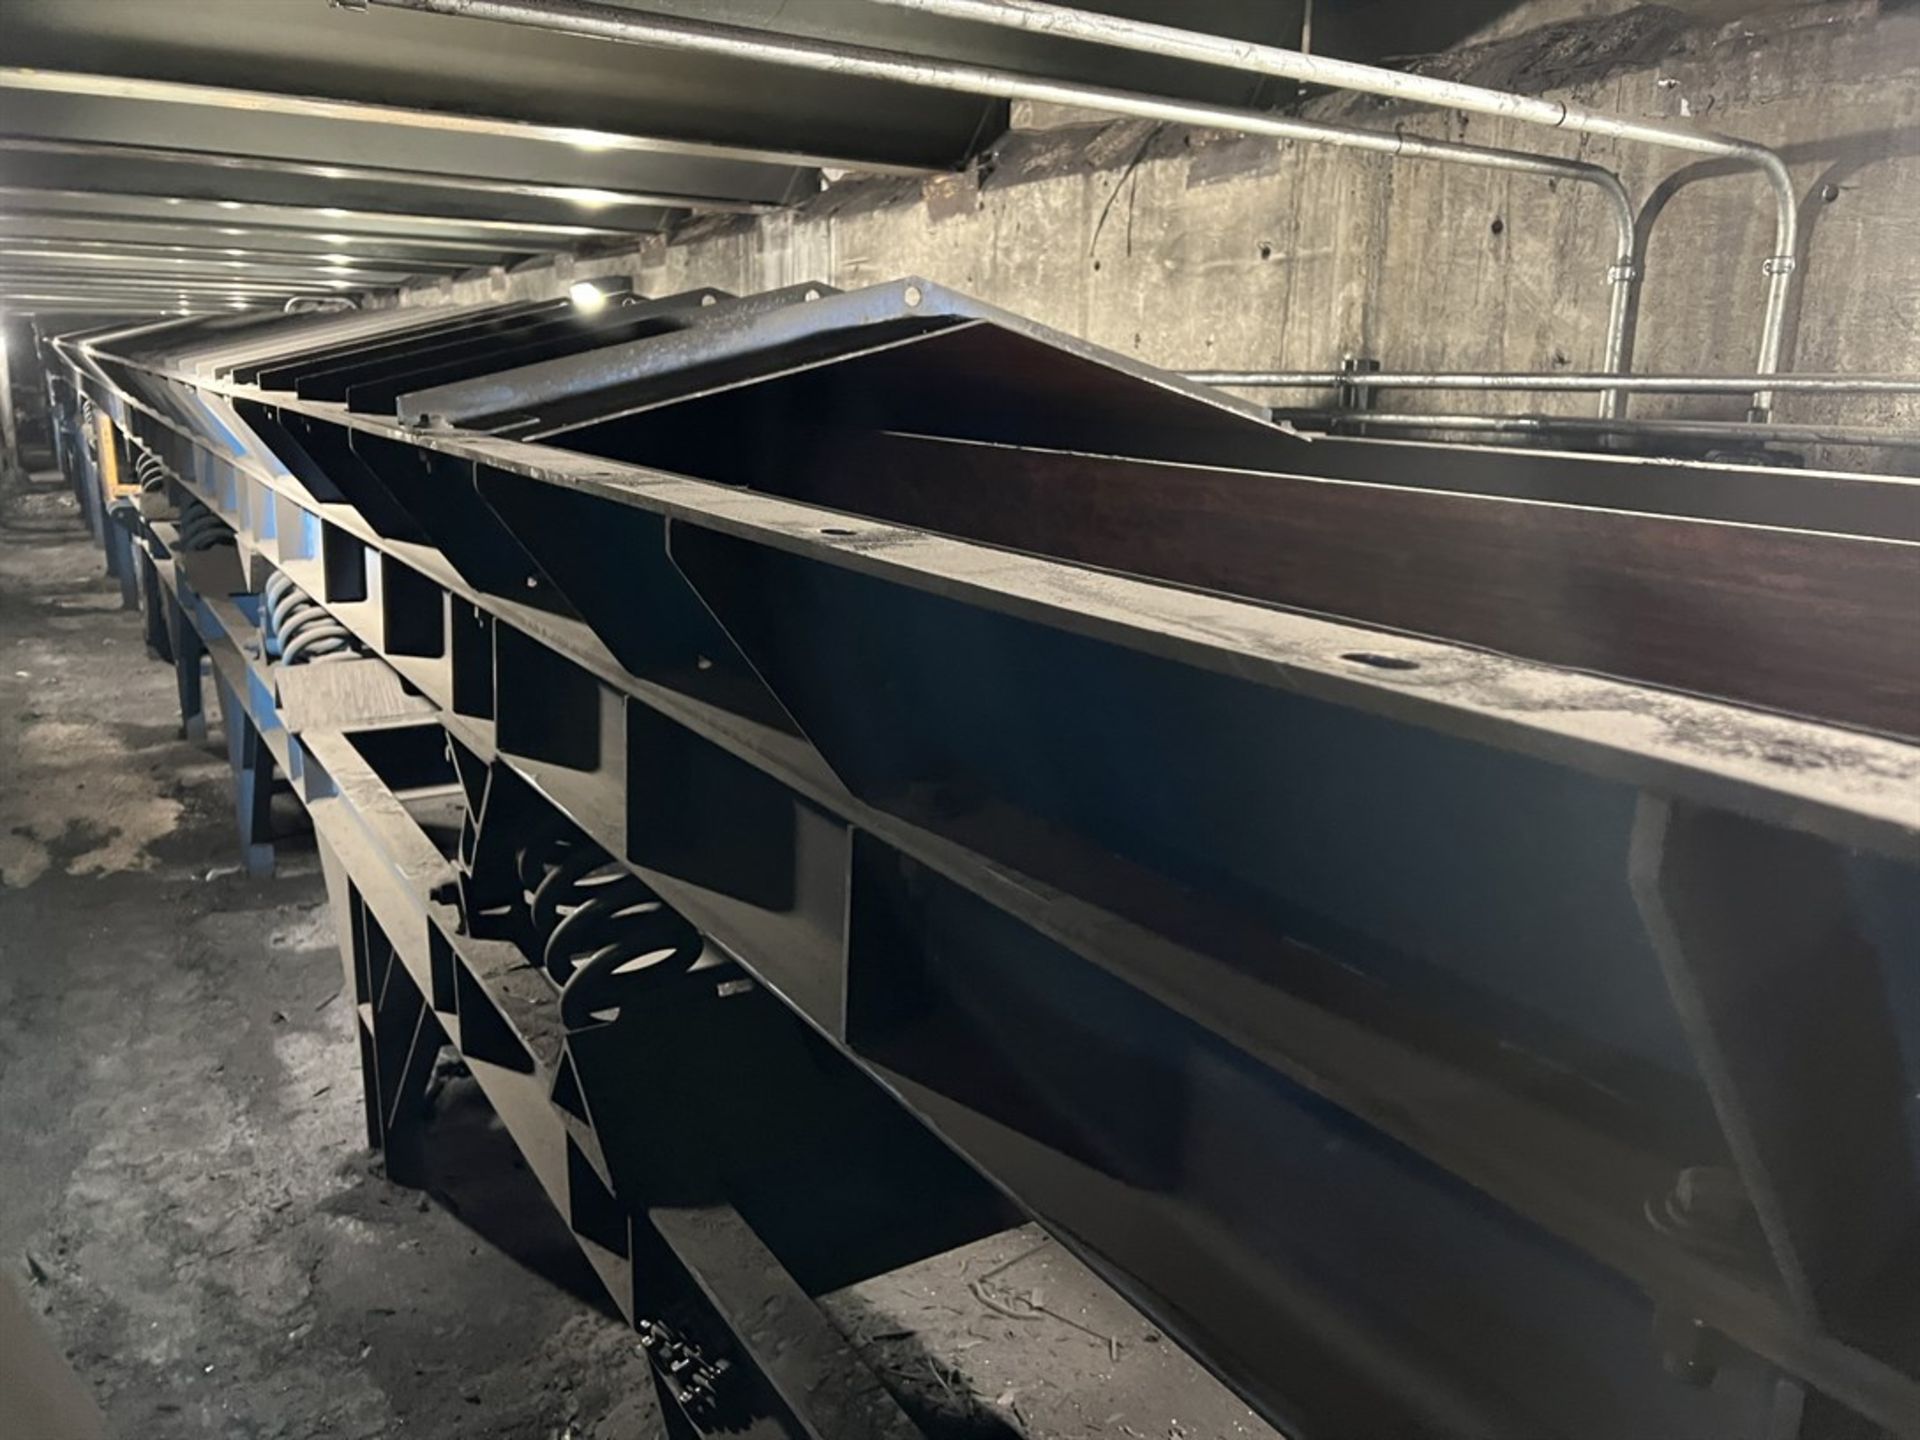 2017 GENERAL KINEMATICS Syncro-Coil SCRT-D 36/48X12X77.75 Vibrating Conveyor, s/n C11076-19 - Image 4 of 5